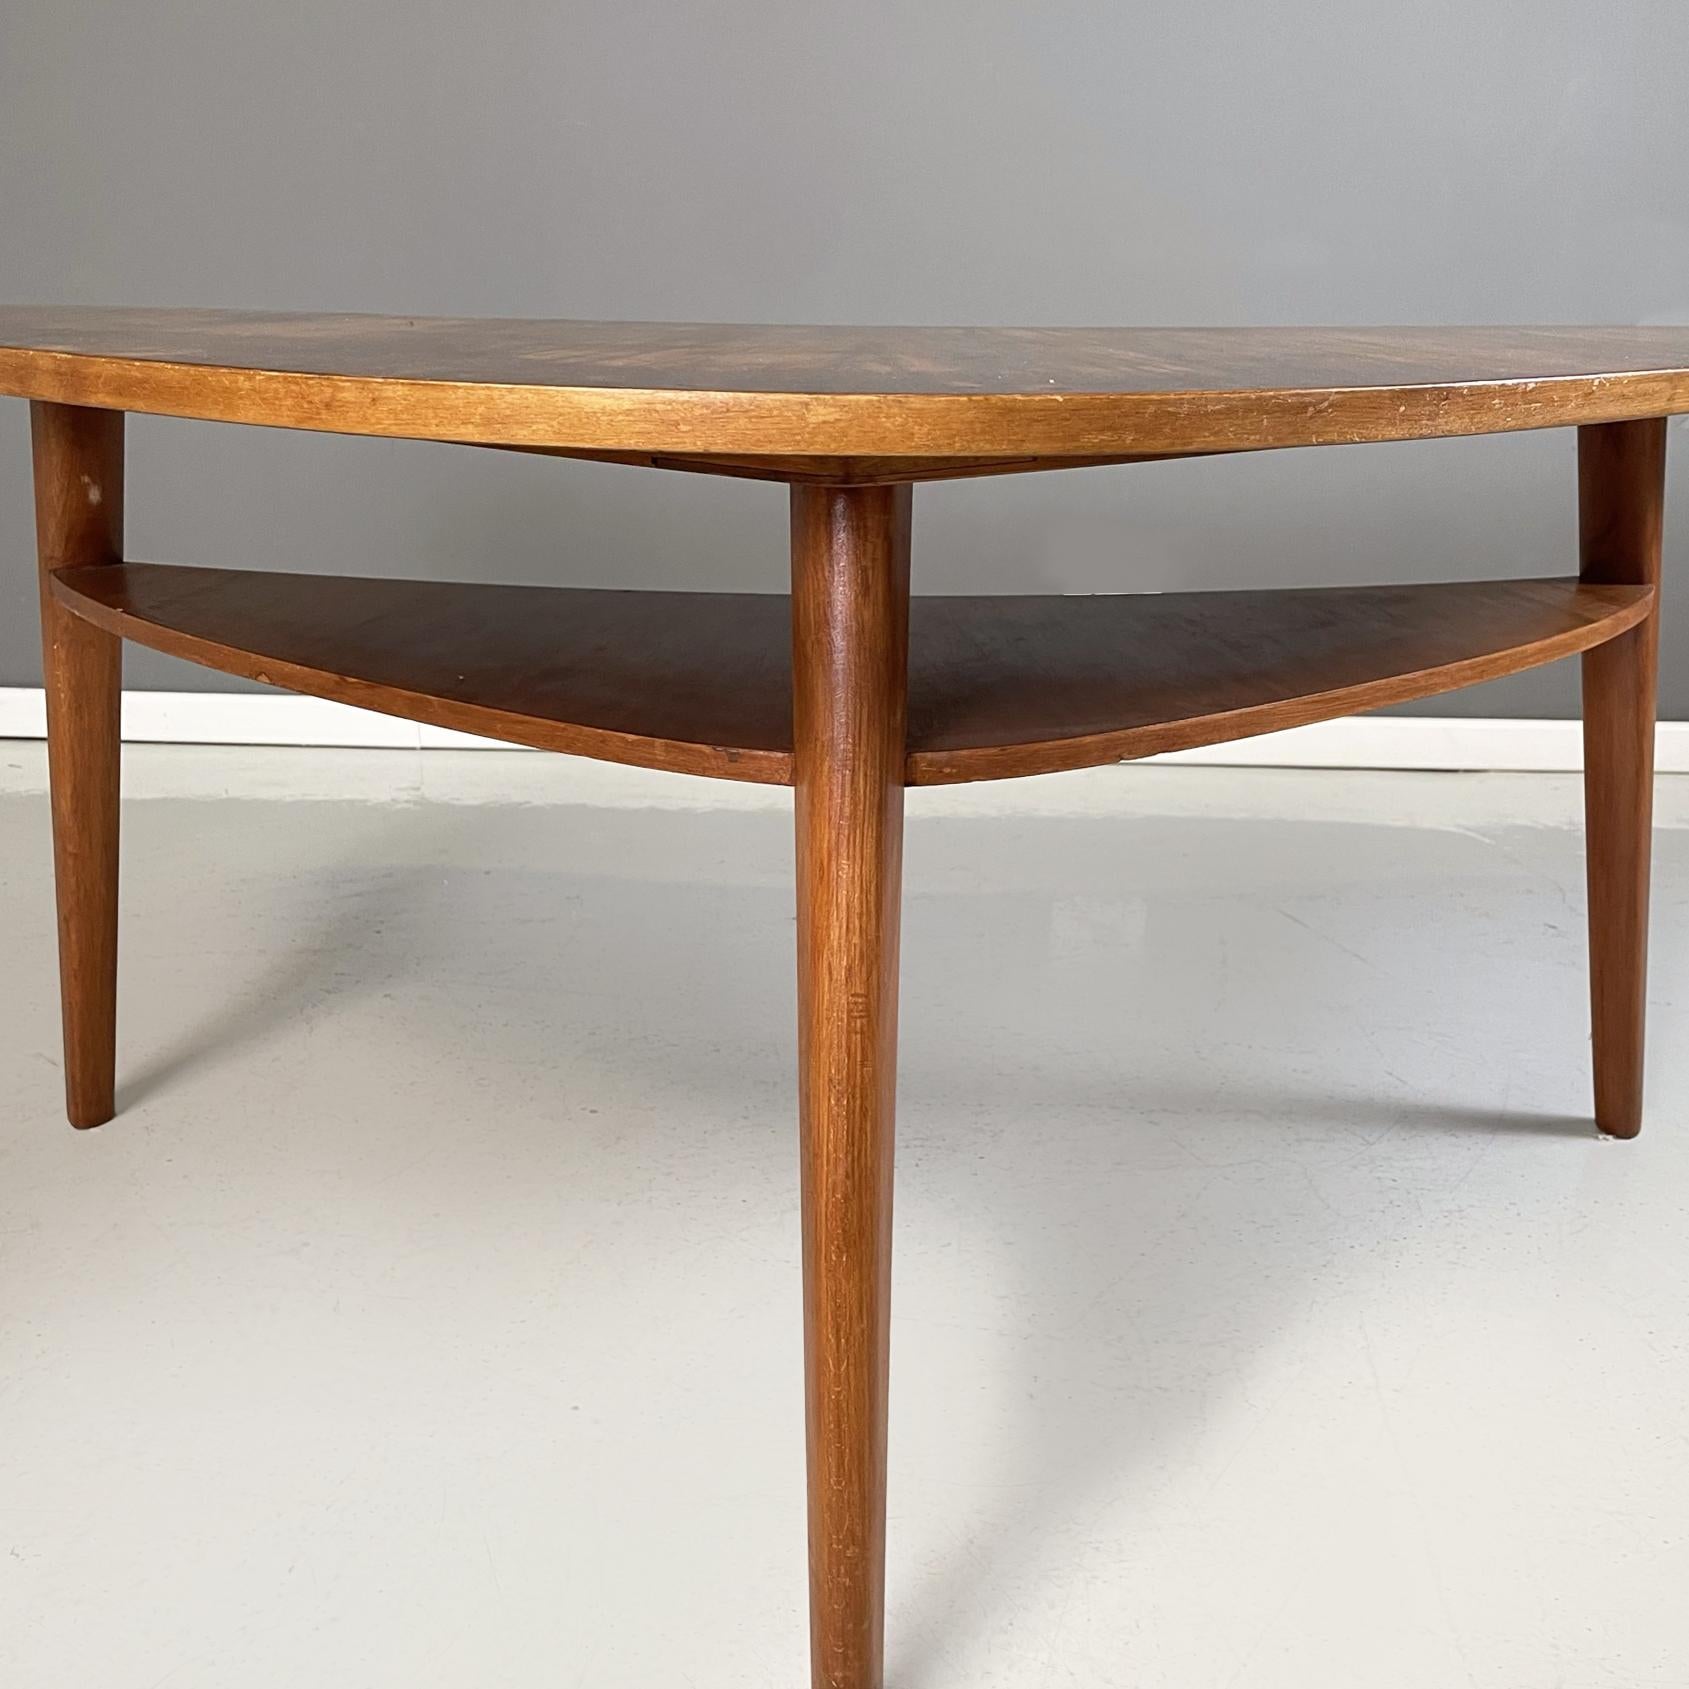 North Europa Midcentury Triangular Coffe Table with Double Shelves in Wood, 1960 For Sale 4